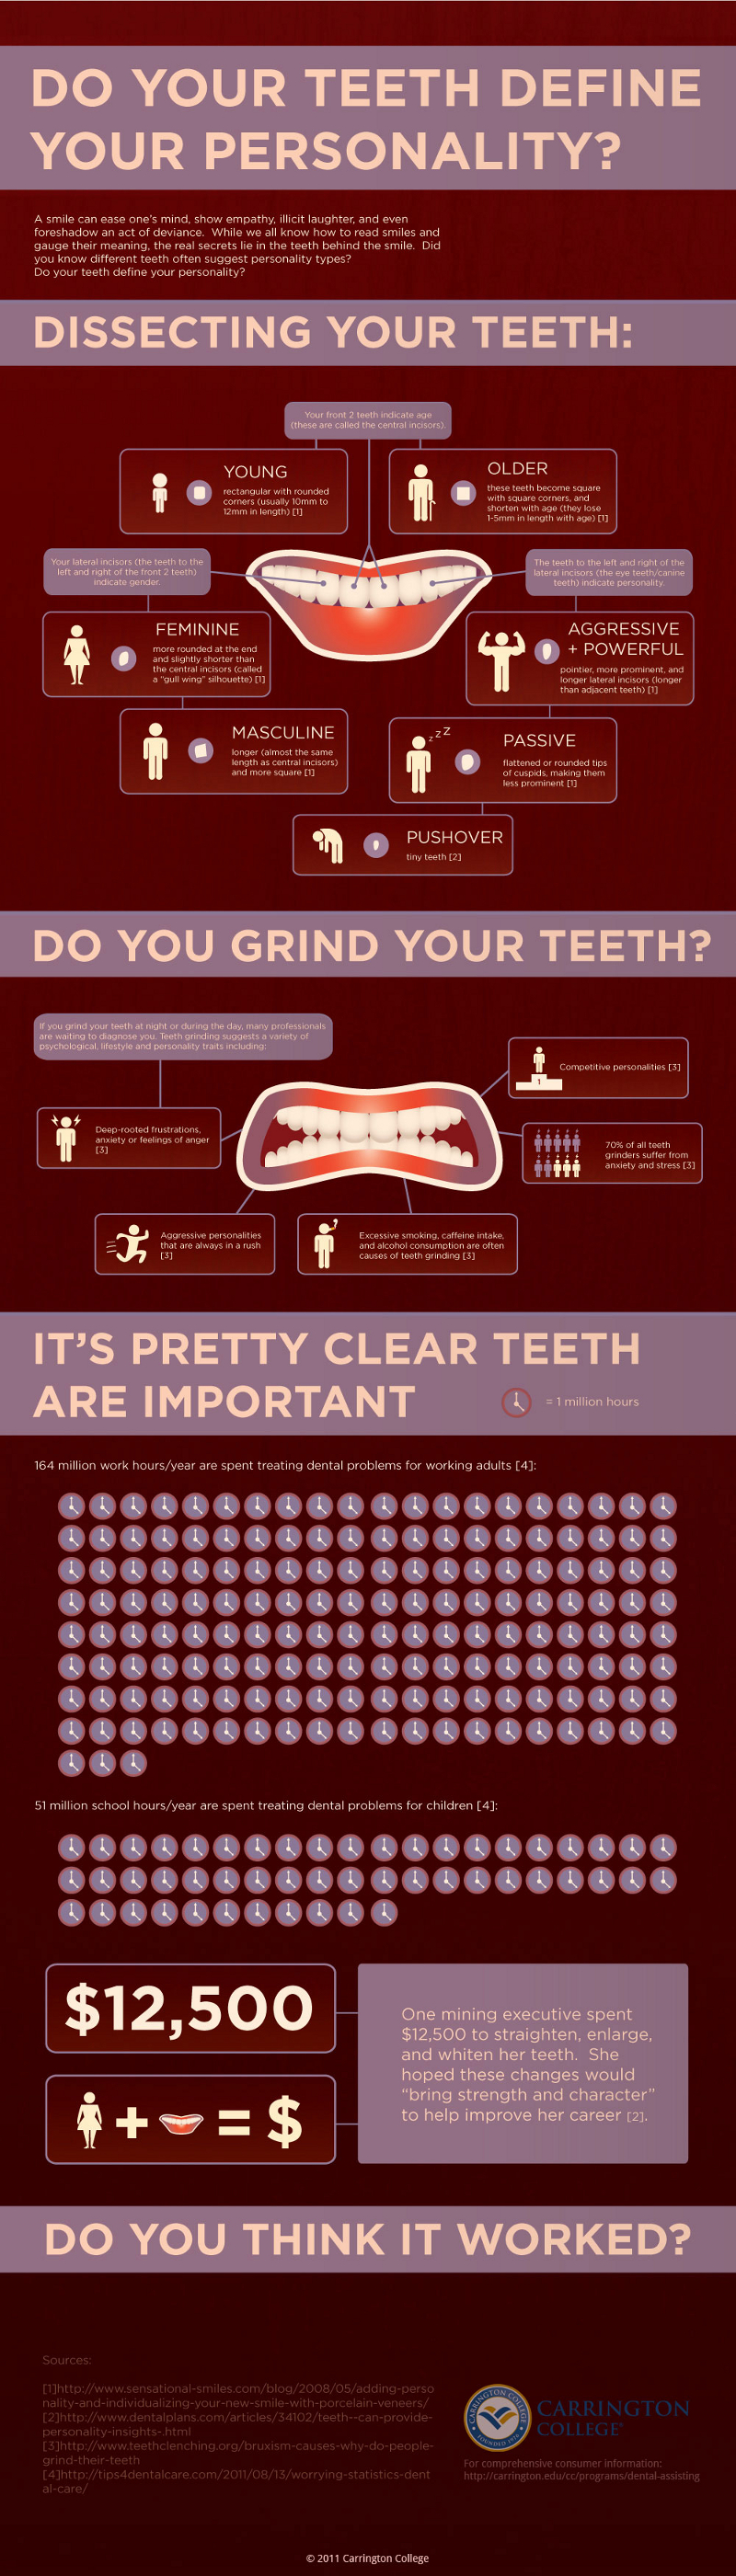 How Teeth Define Your Personality